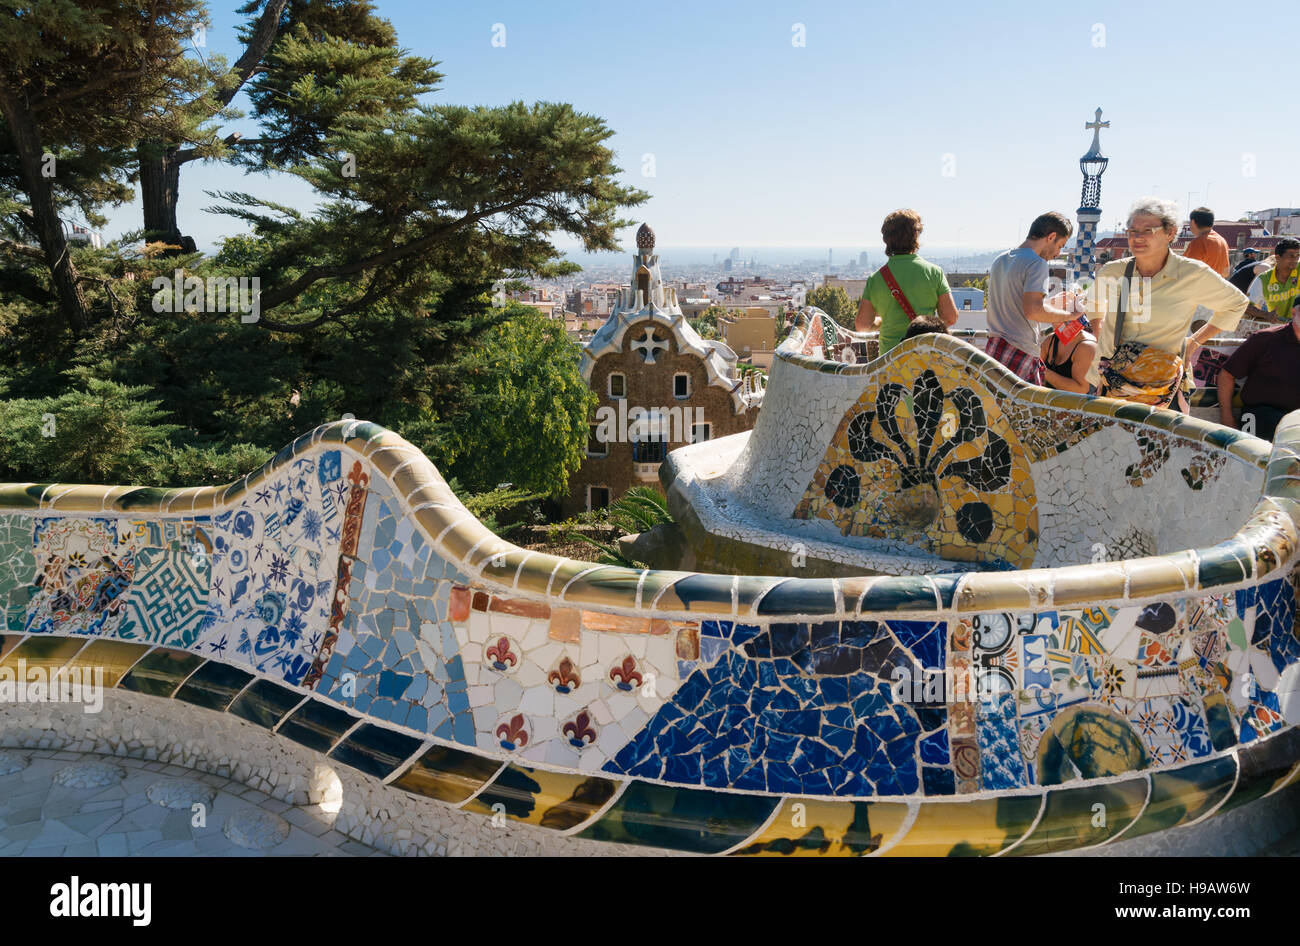 Barcelona, Spain - October 10, 2011: The Park Güell is a public park system composed of gardens and architectonic elements located on Carmel Hill Stock Photo